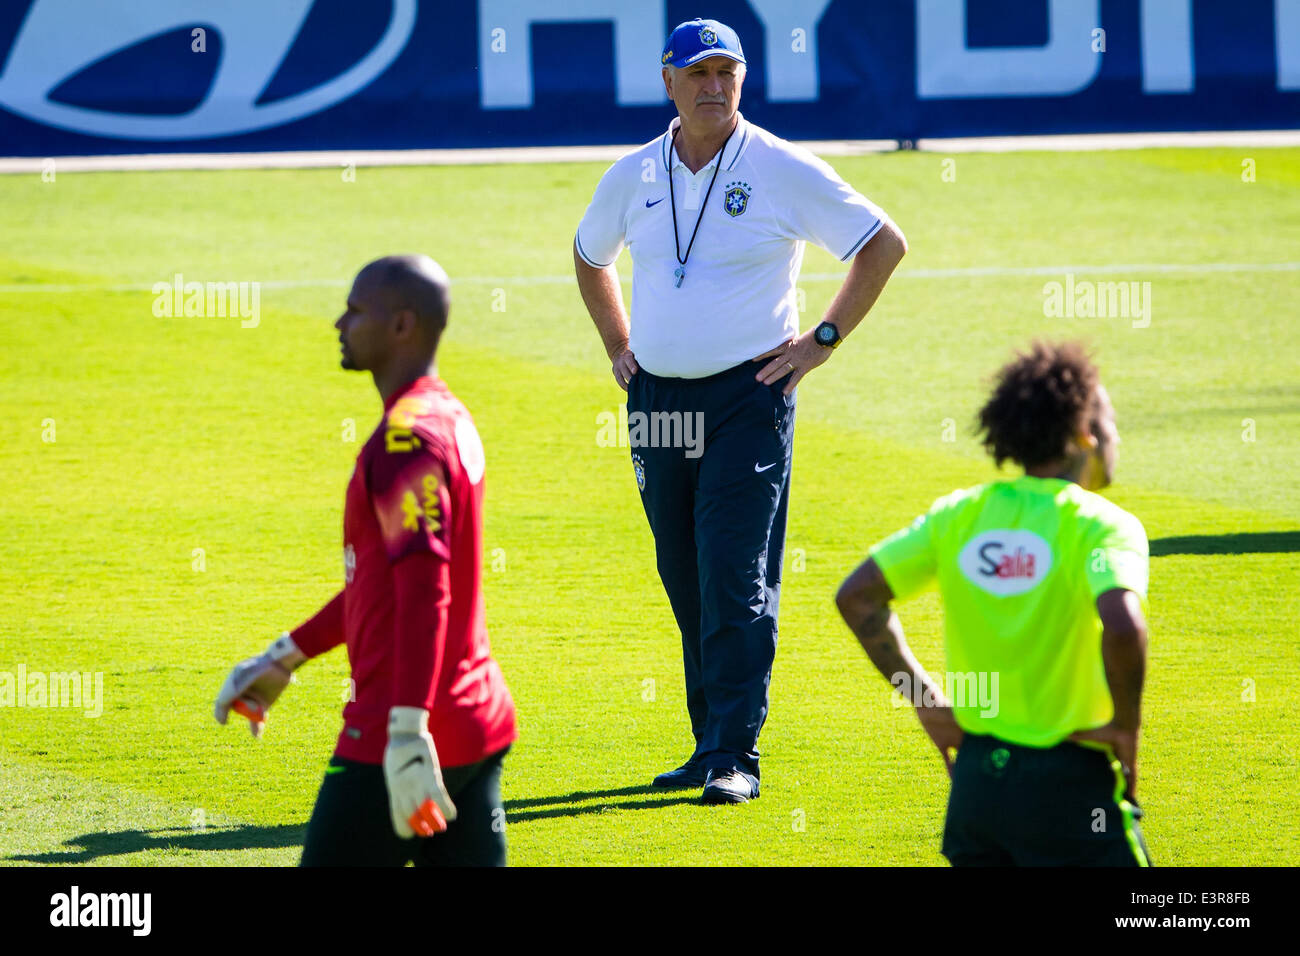 Belo Horizonte, Brazil. 27th June, 2014. Brazil's head coach Luiz Felipe Scolari (C) looks on during a training session in Belo Horizonte, Brazil, June 27, 2014. Brazil's national football team participated in a training session for the first match of the Round of 16 here on Friday. © Liu Bin/Xinhua/Alamy Live News Stock Photo